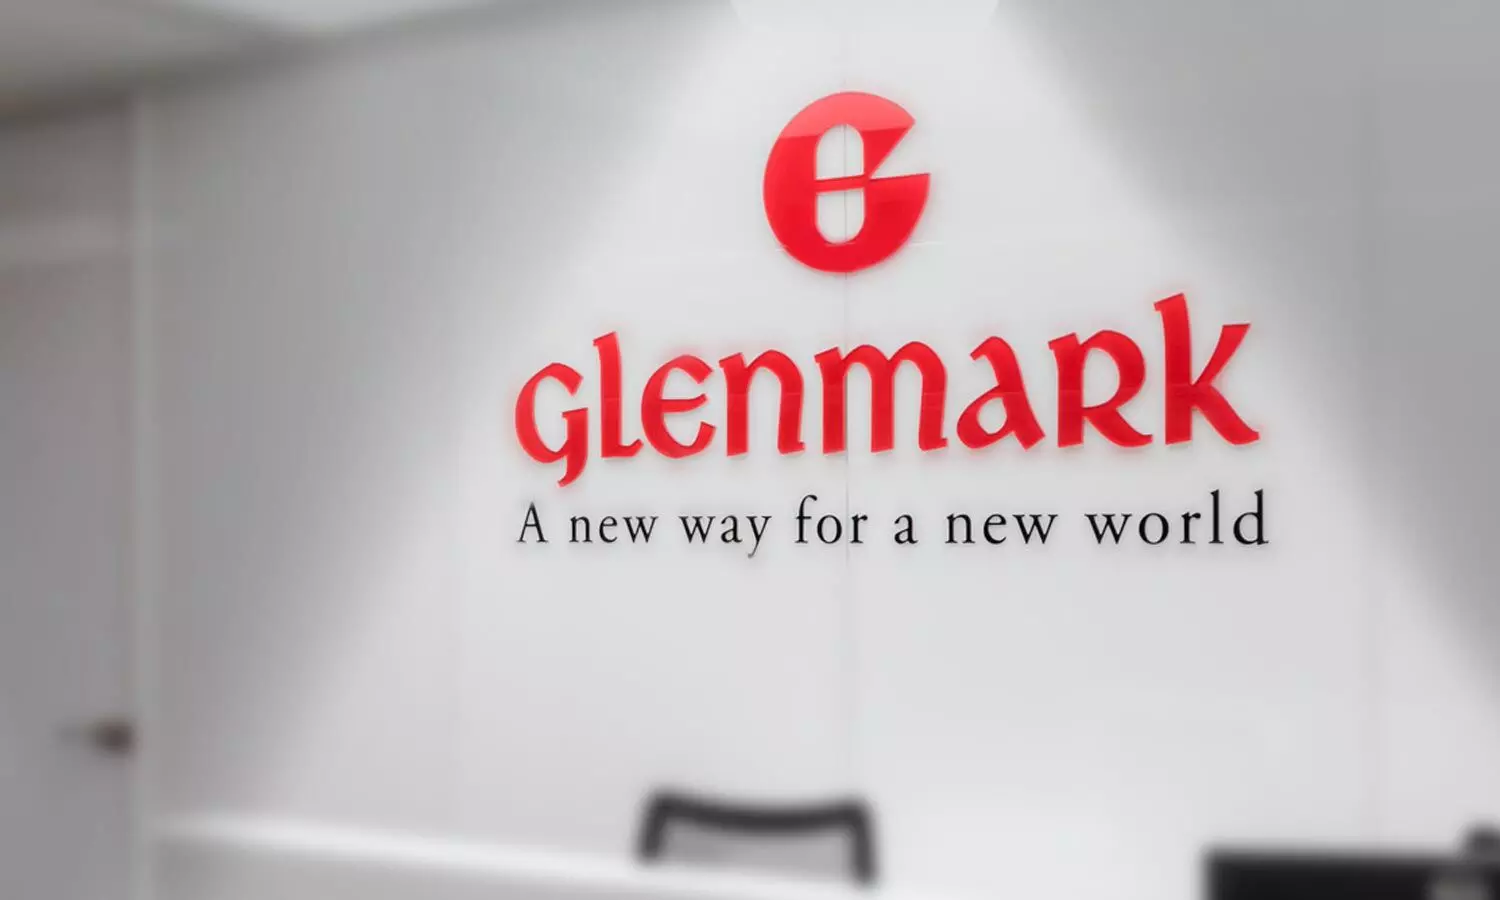 Glenmark gets USFDA approval for Dimethyl Fumarate Delayed-Release Capsules